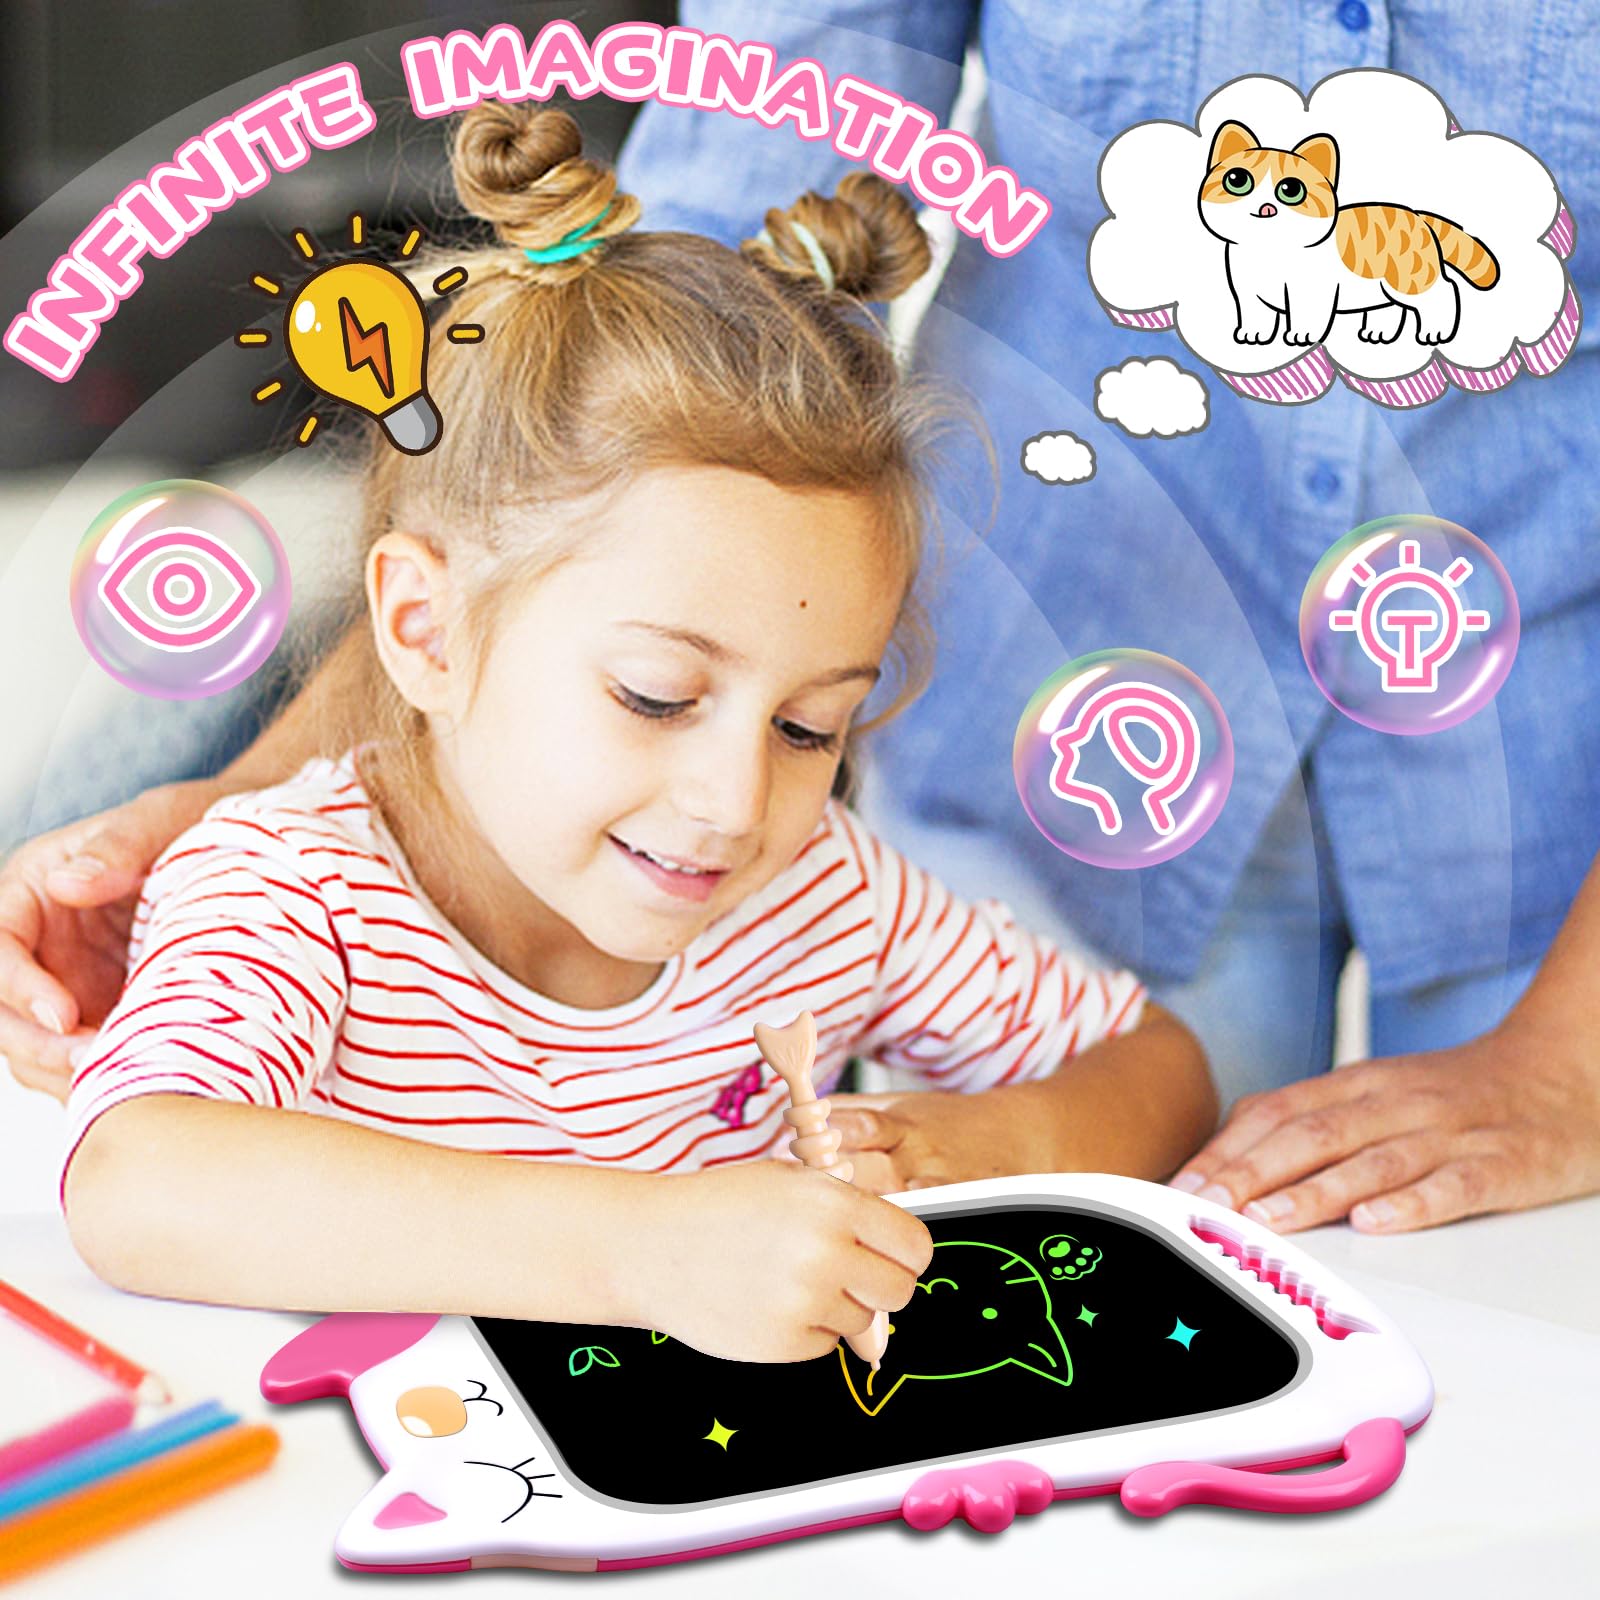 GJZZ Drawing Doodle Board Toys for 3 4 5 6 7 Year Old Girls Boys Gifts, LCD Writing Tablet and Scribble Board Learning Toy for Kids, Birthday Gift for Toddler - Pink White